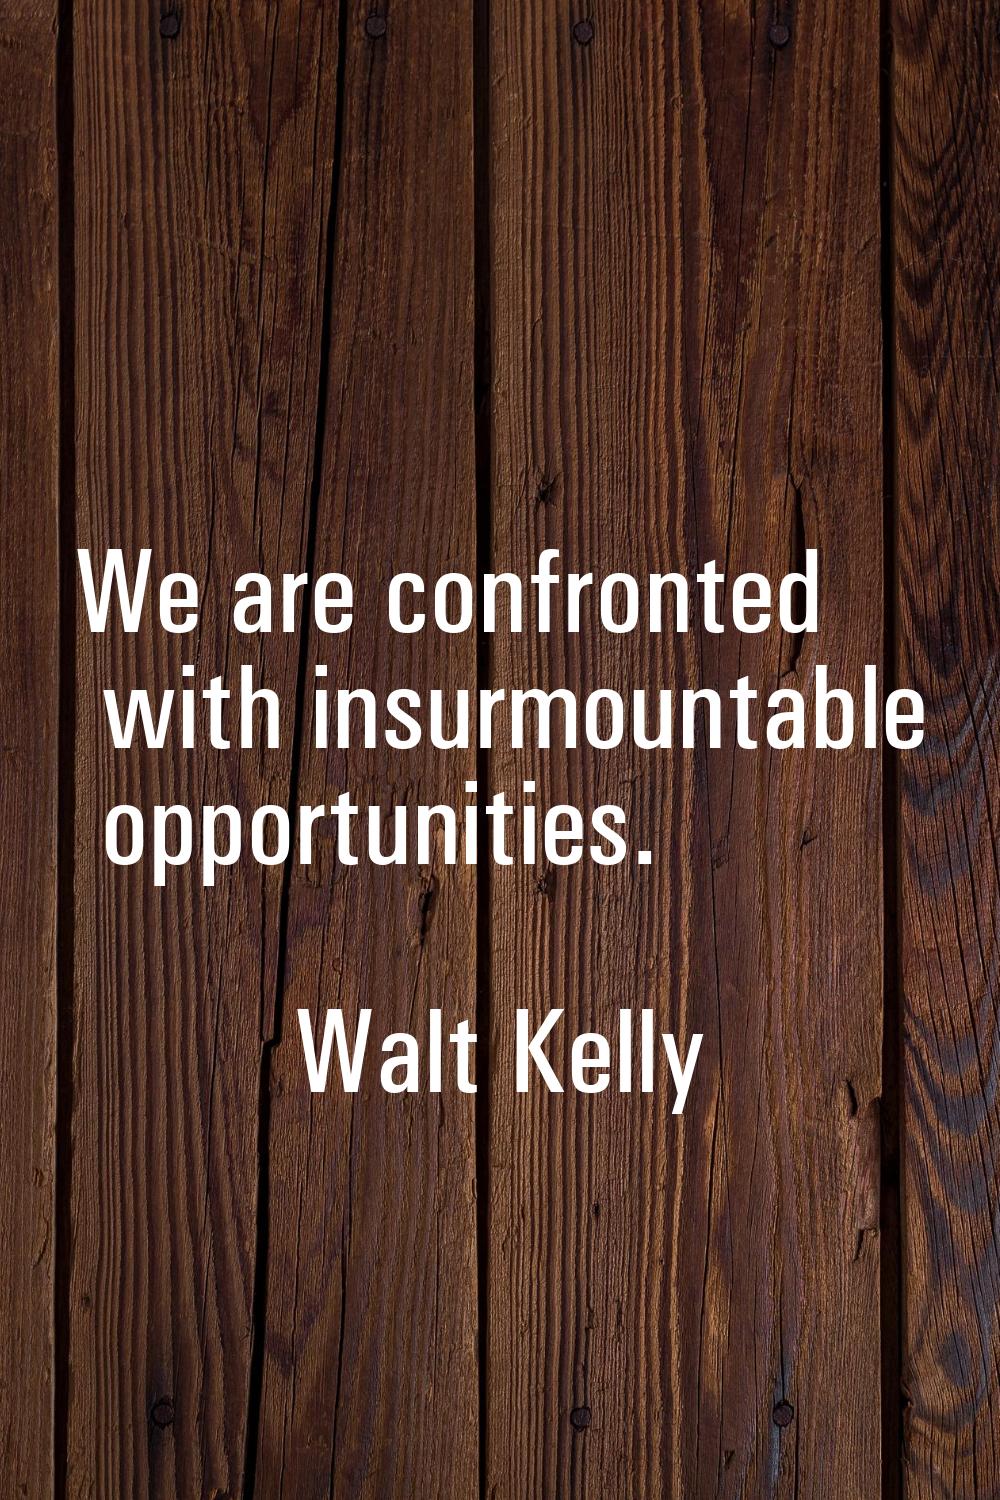 We are confronted with insurmountable opportunities.